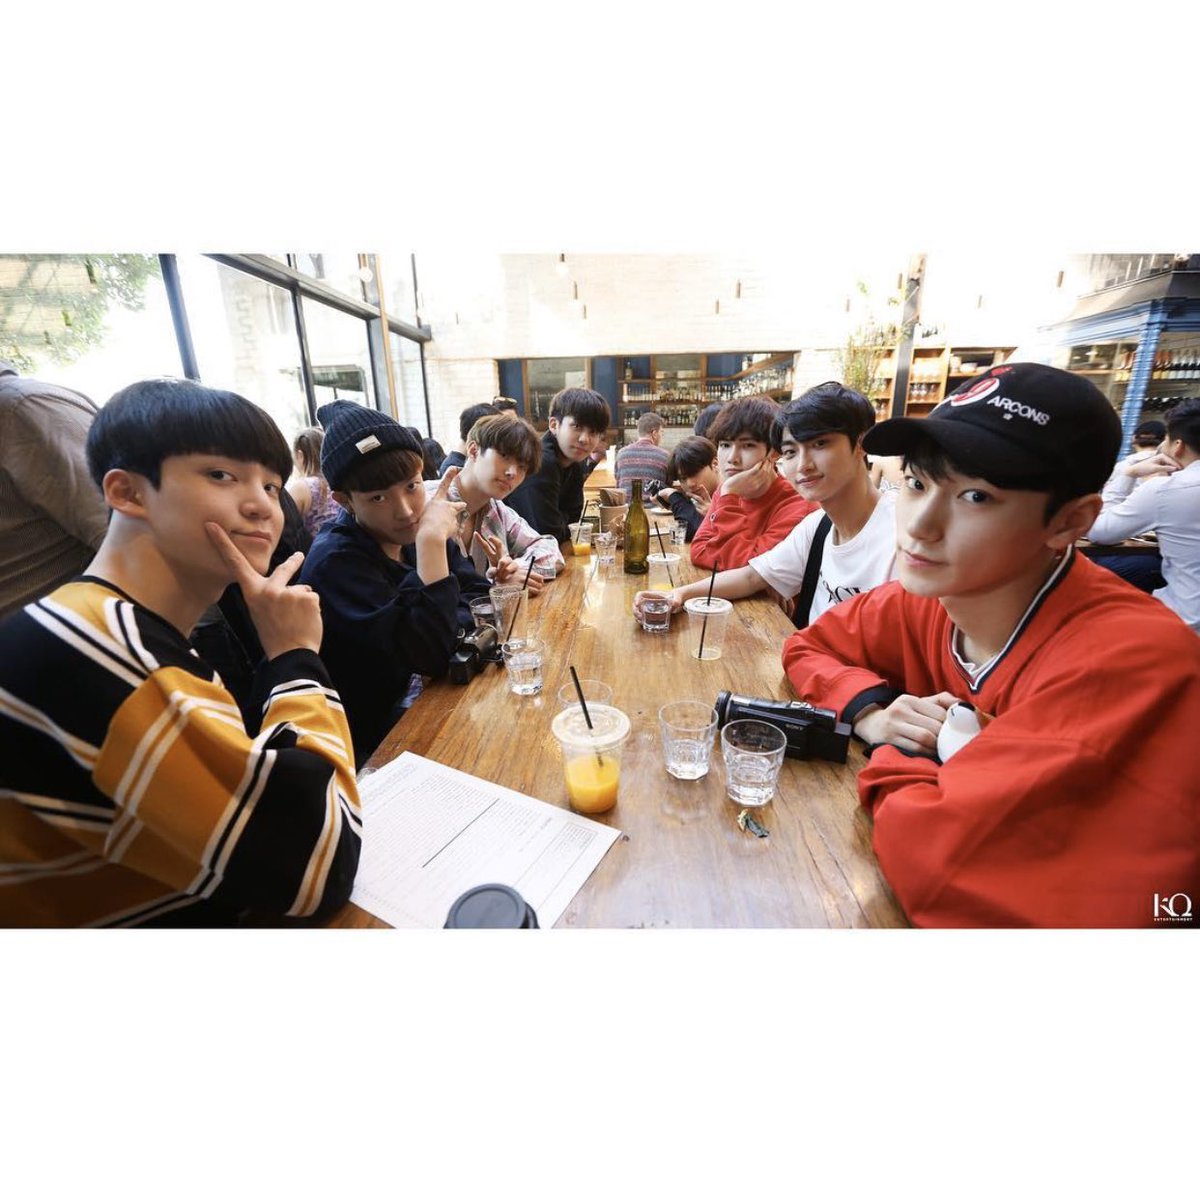 some predebut group pics to make you absolutely soft